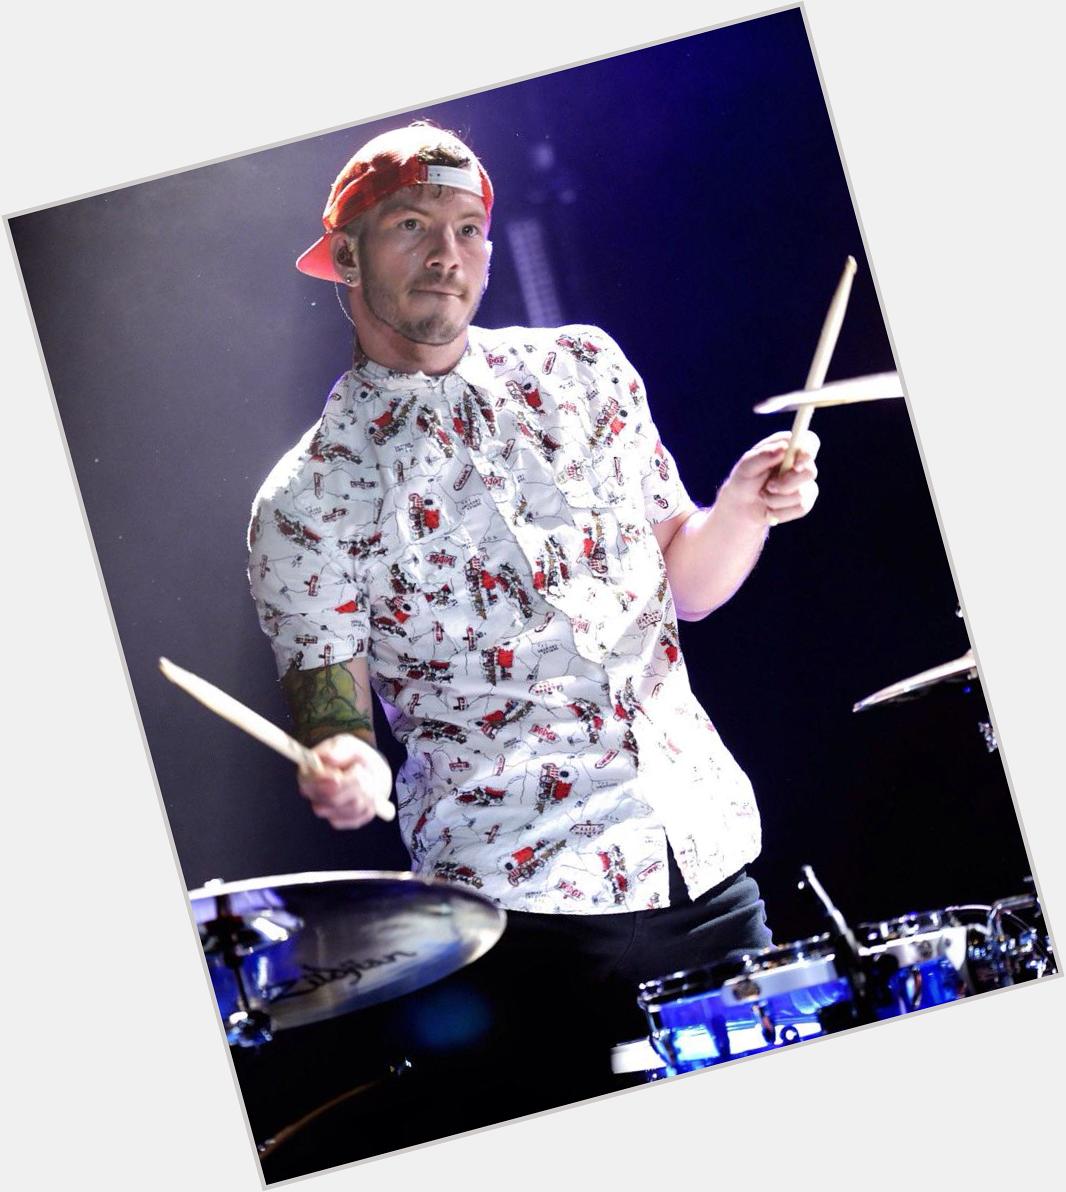 Happy Birthday to my son and spirit animal the one and only Spooky Jim..uhm I mean Josh Dun |-/  